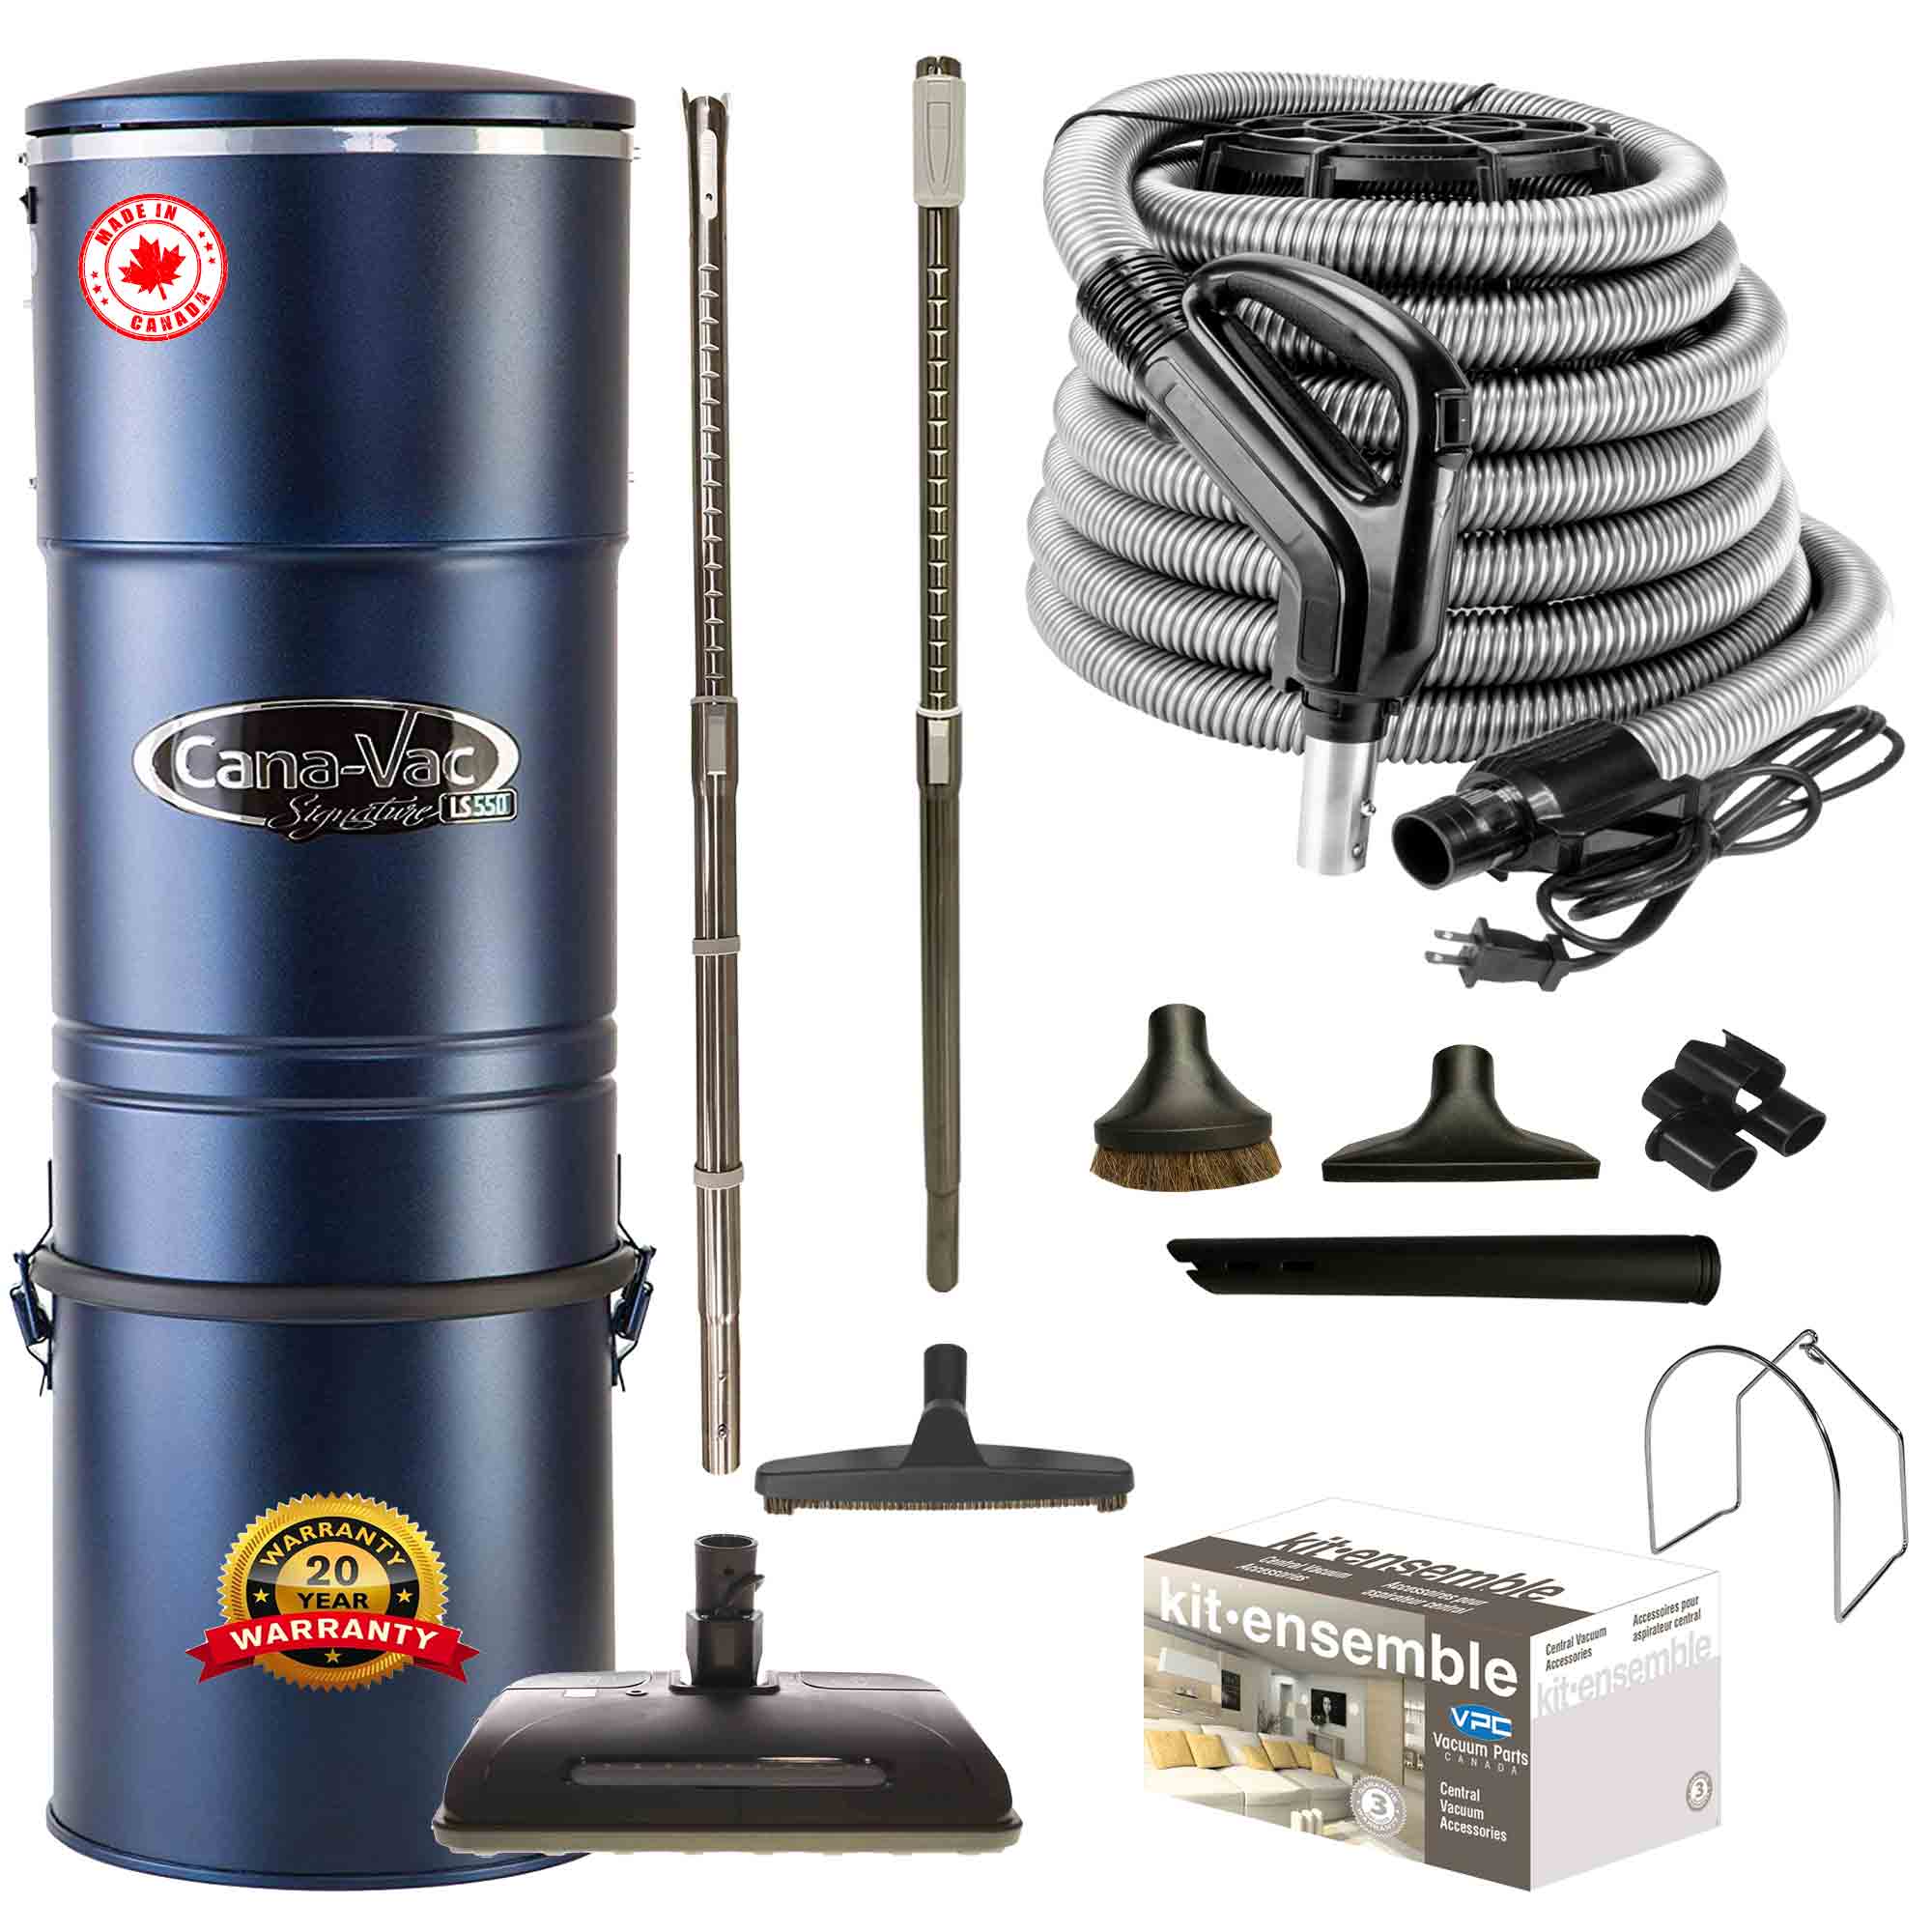 Cana-Vac LS590 Central Vacuum with Ultra Electric Package (Black)